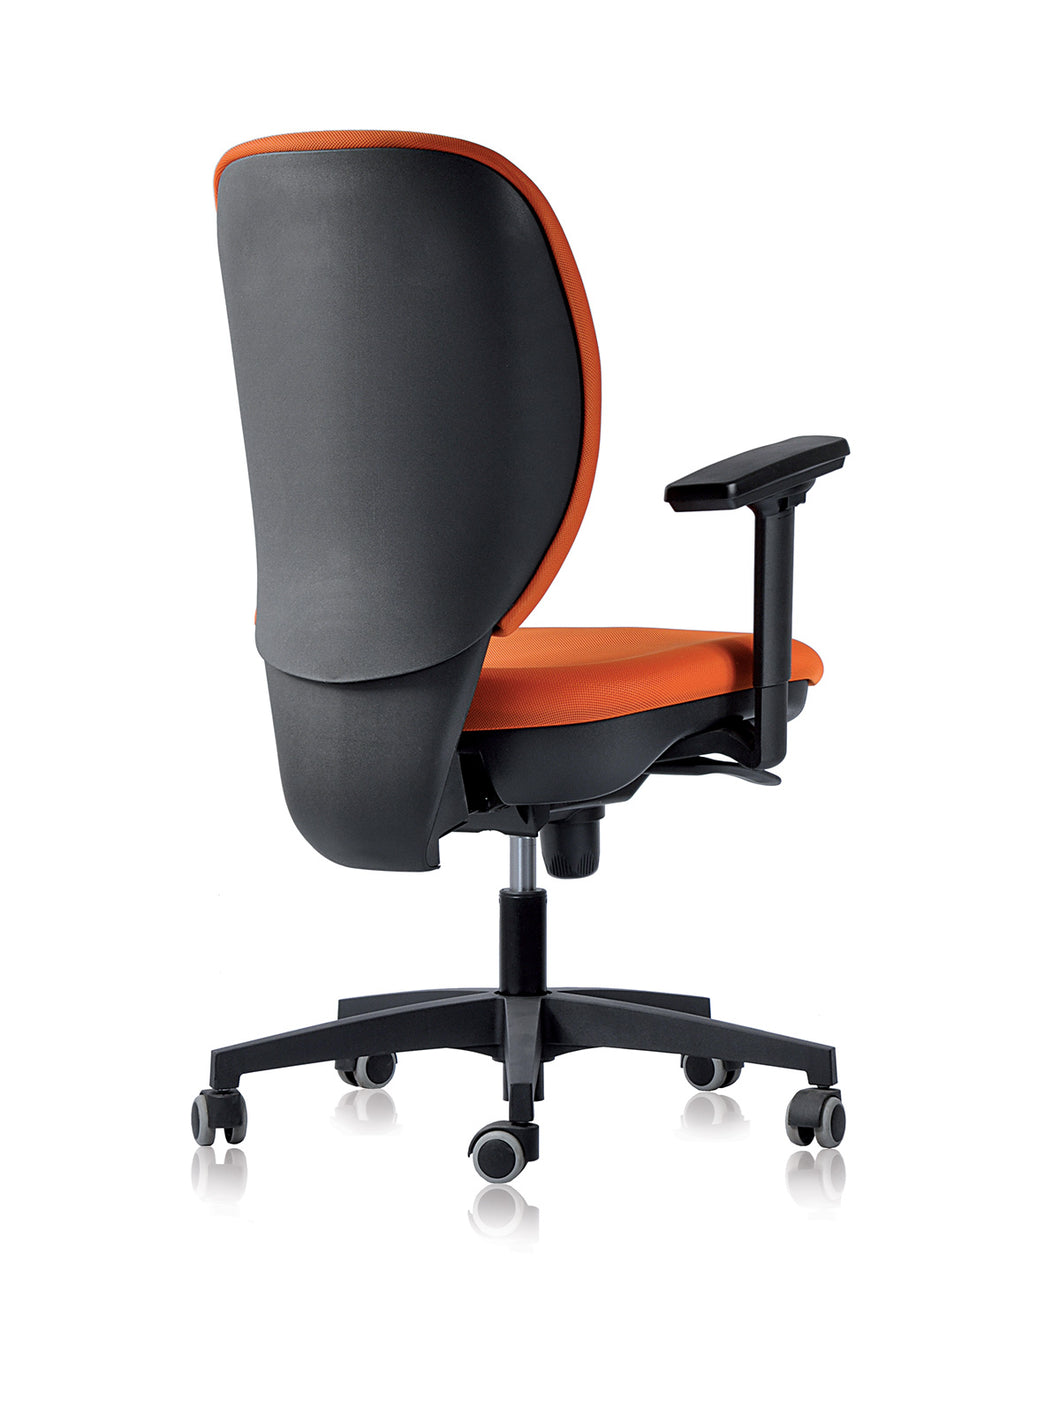 GIOTTO -Synchron Office Chair. (Price includes free pair of 2 Directional Arms)